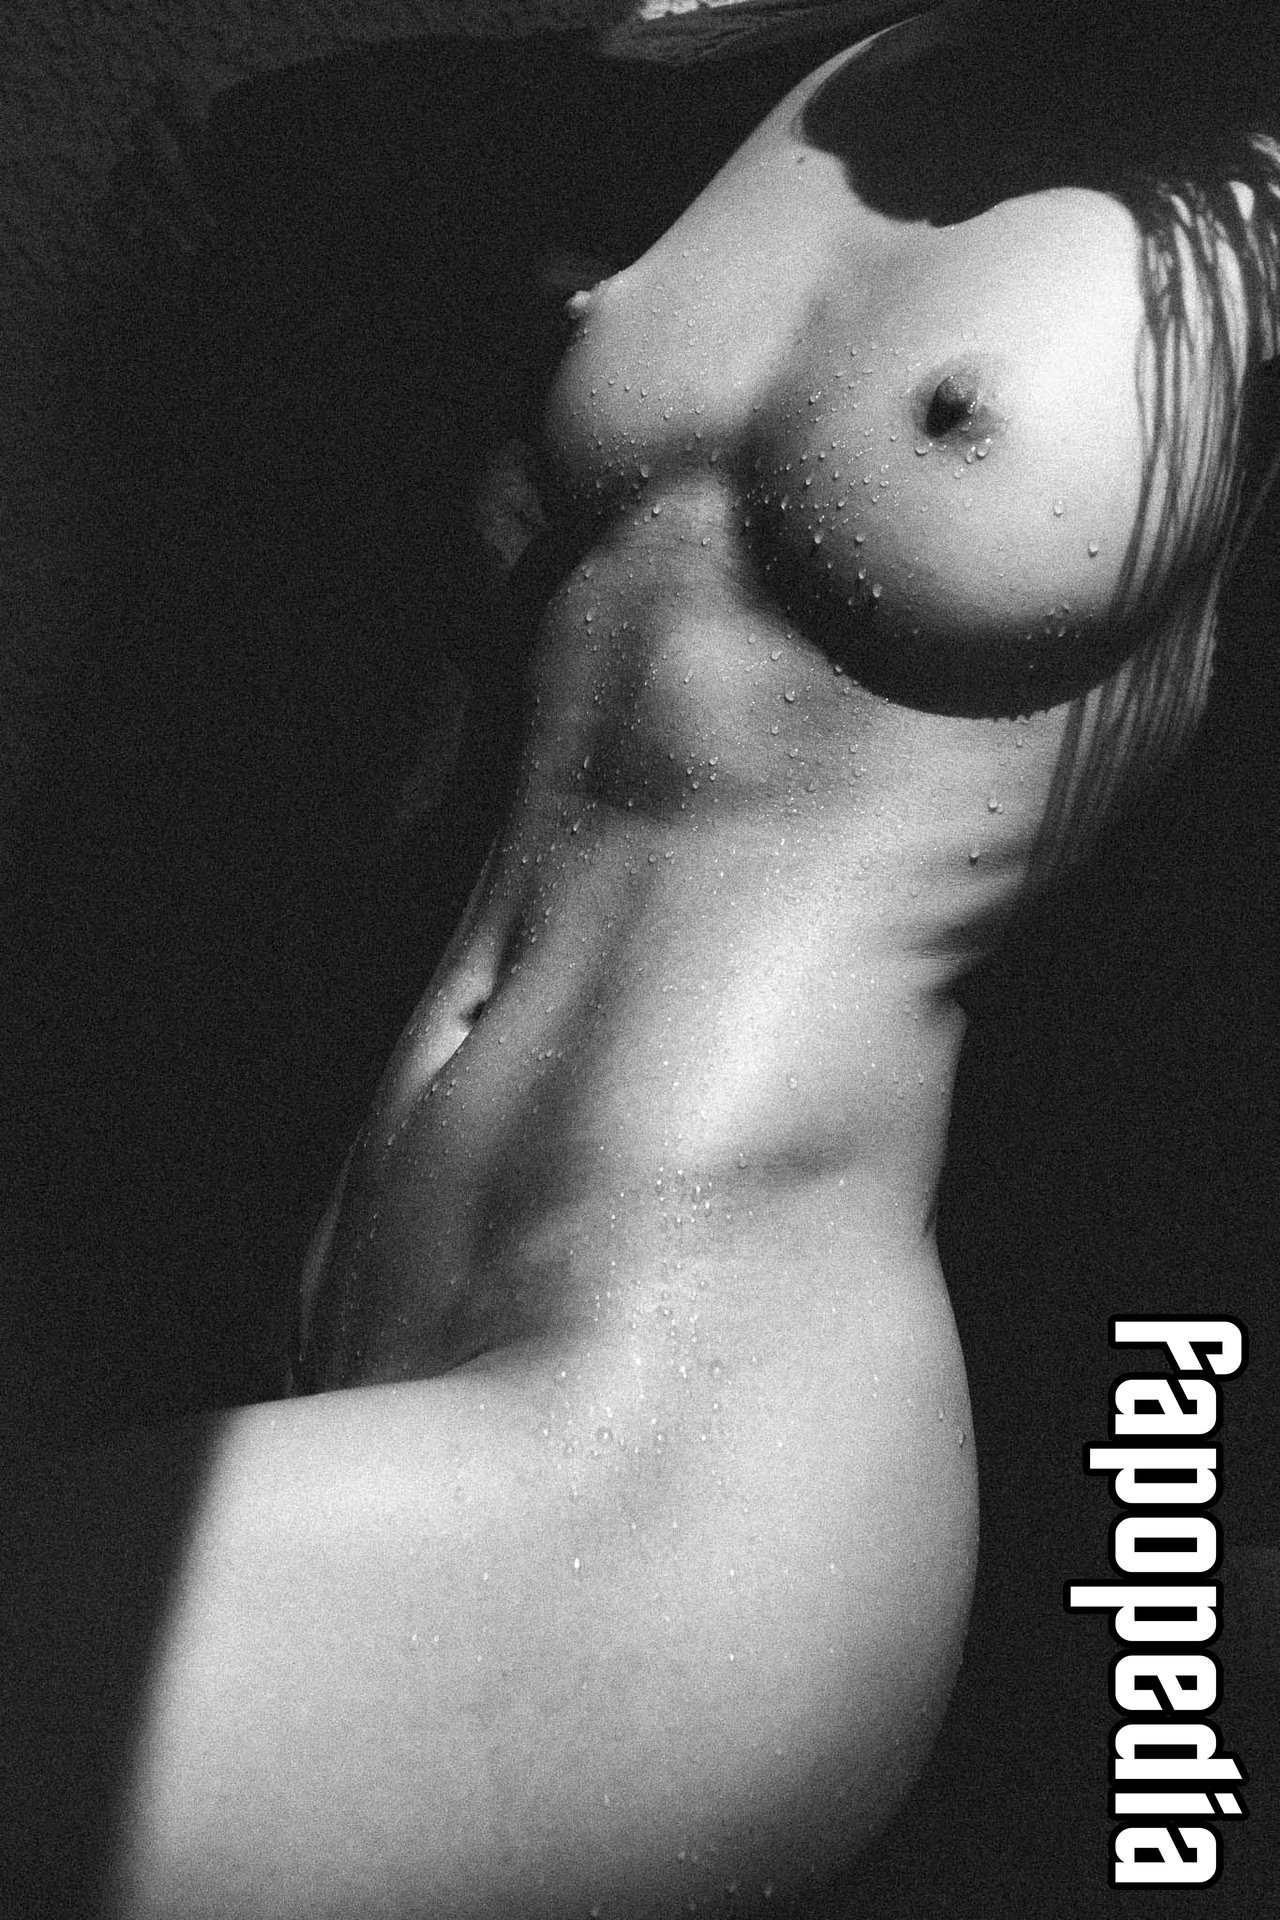 Phoebe crnich nude